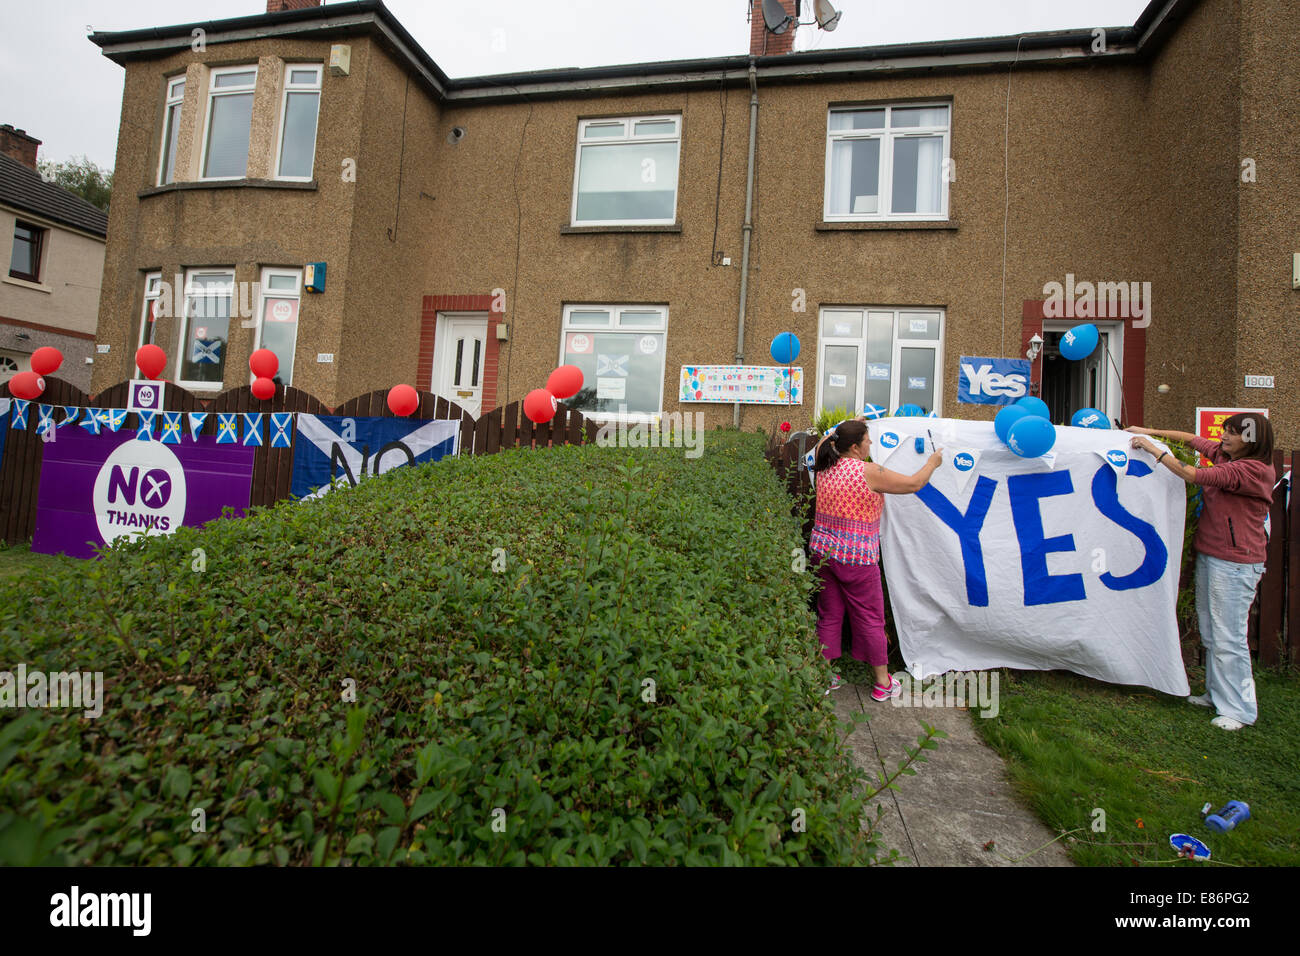 house covered in pro-independence Yes signs, and neighbour's house covered in pro-Union signs, Scottish independence referendum. Stock Photo